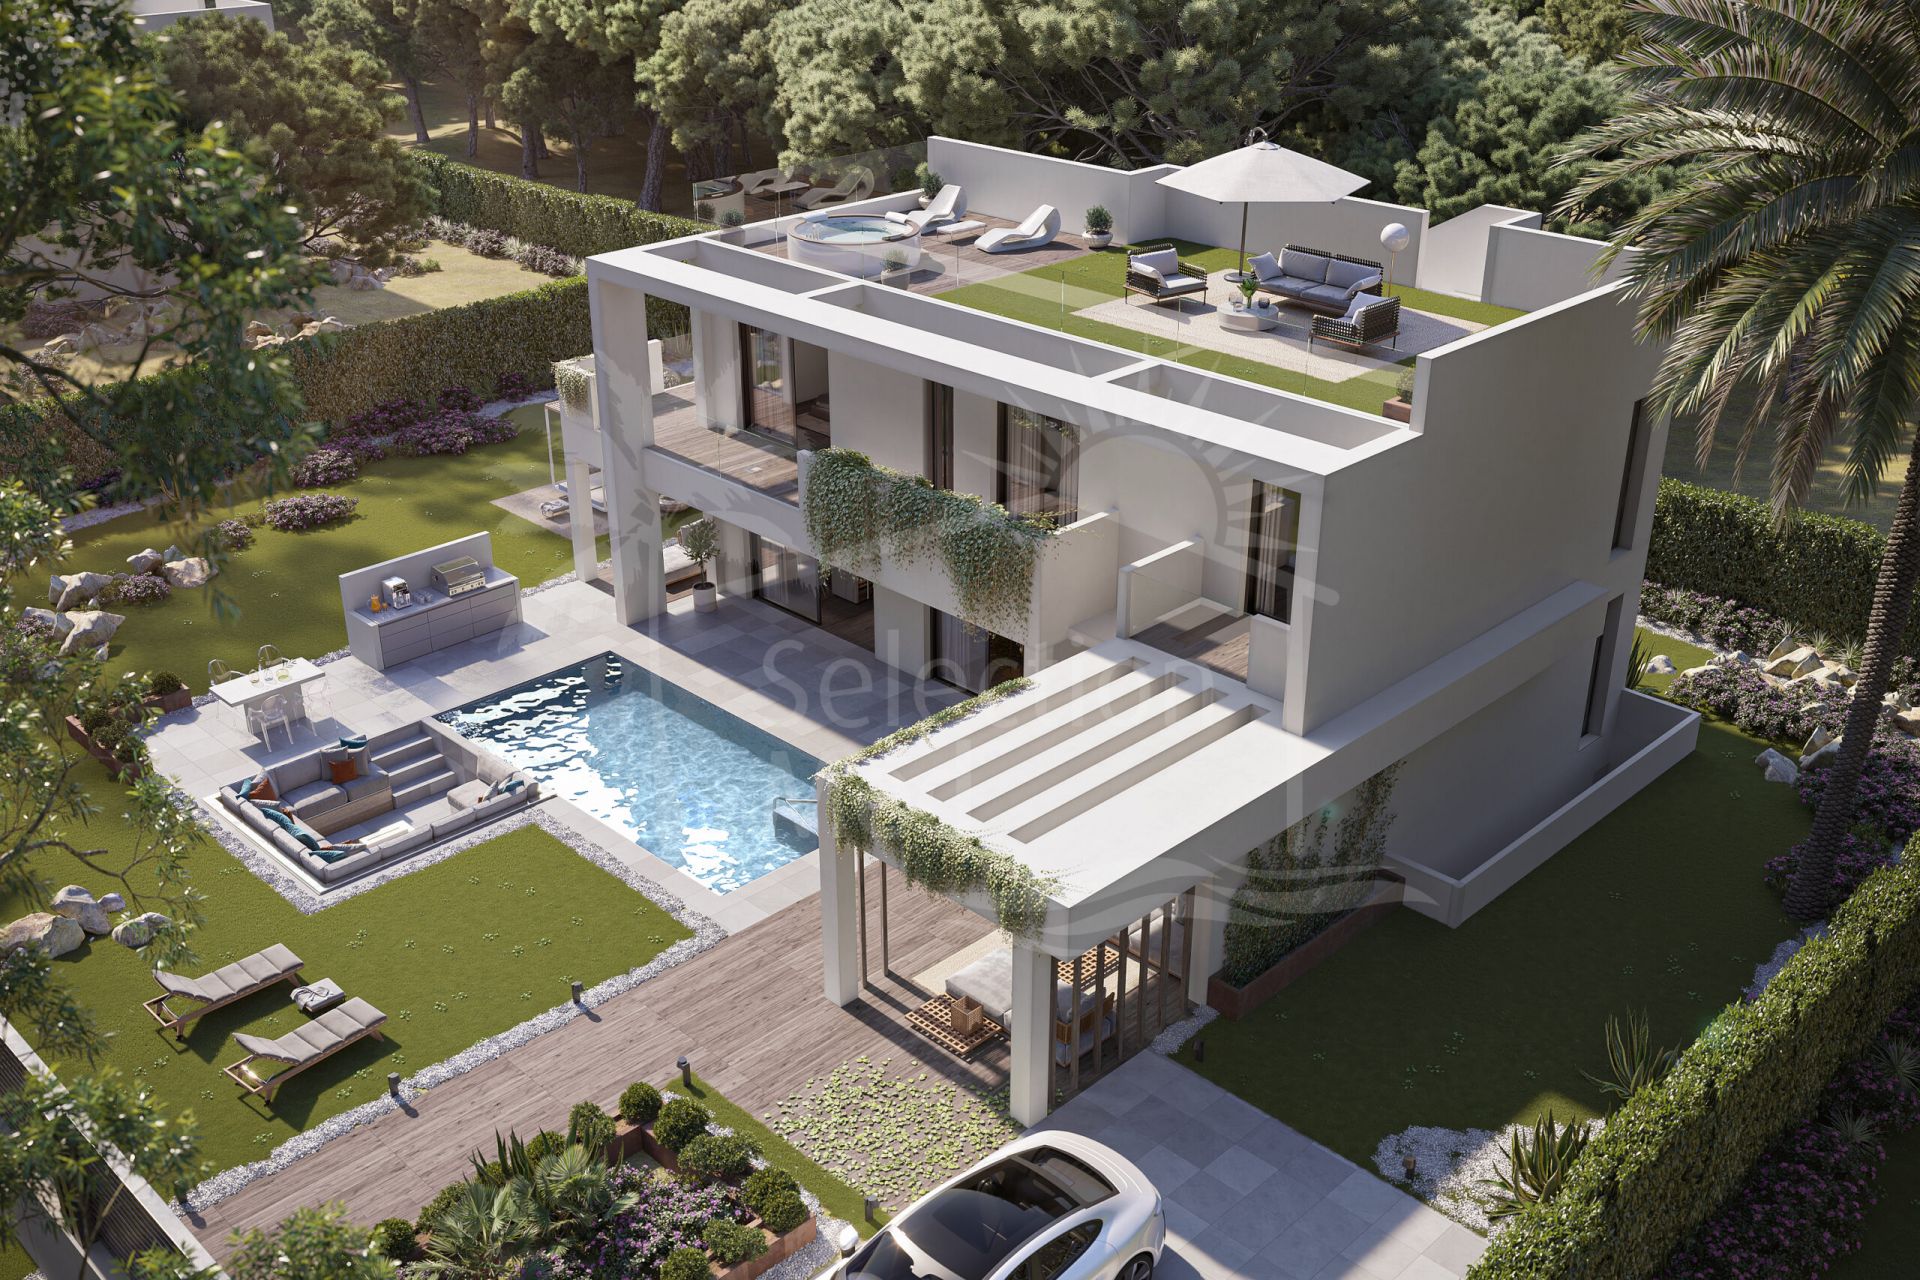 La Paloma Collection, stunning contemporary villas in one of the most coveted areas near Sotogrande.